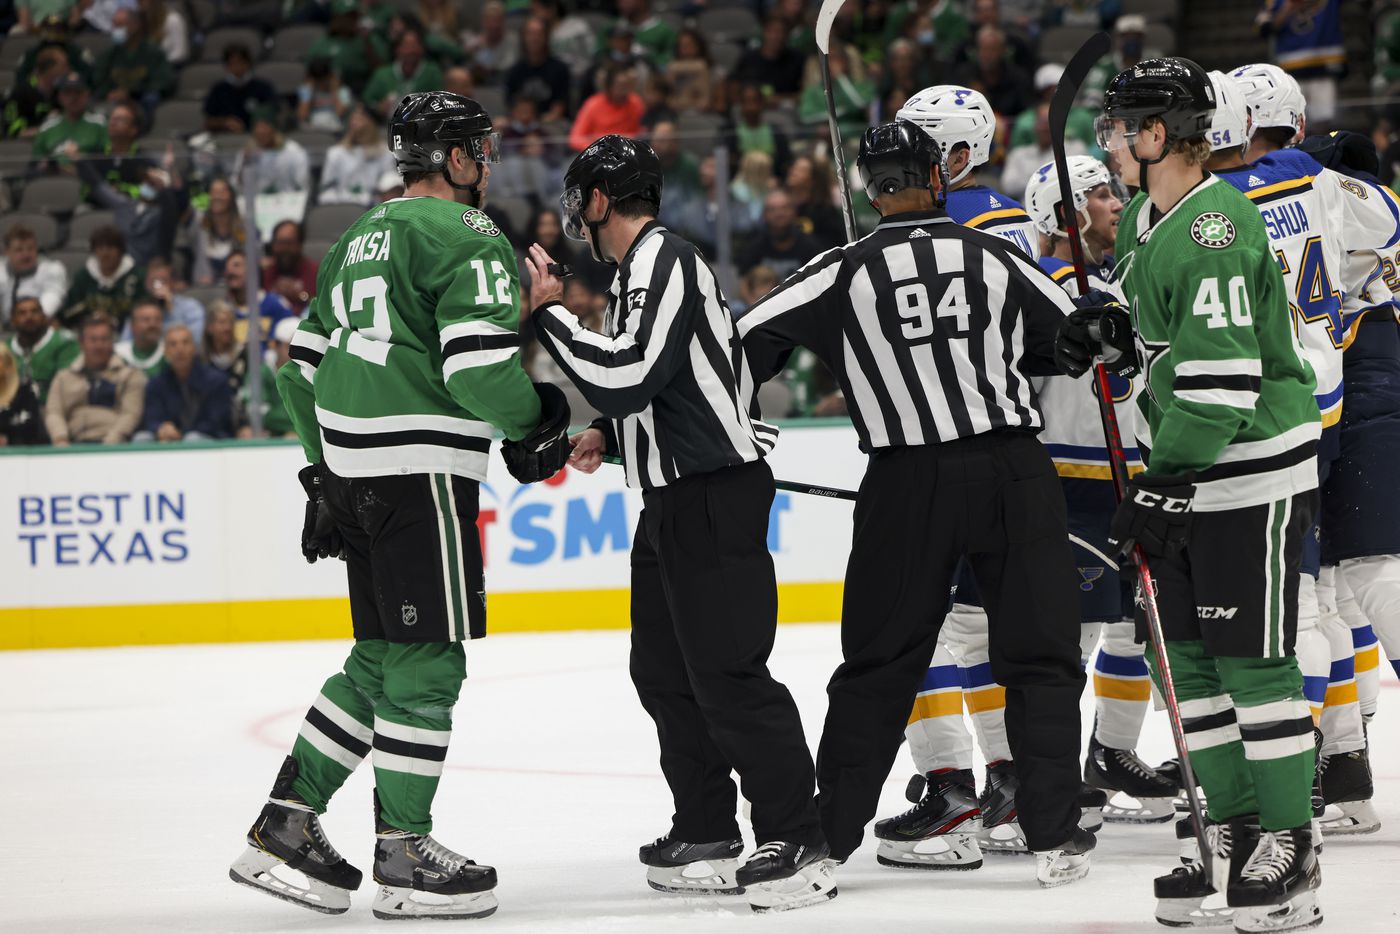 Referees separate players during the second period of a Dallas Stars preseason game against St. Louis Blues on Tuesday, Oct. 5, 2021, at American Airlines Center in Dallas. (Juan Figueroa/The Dallas Morning News)